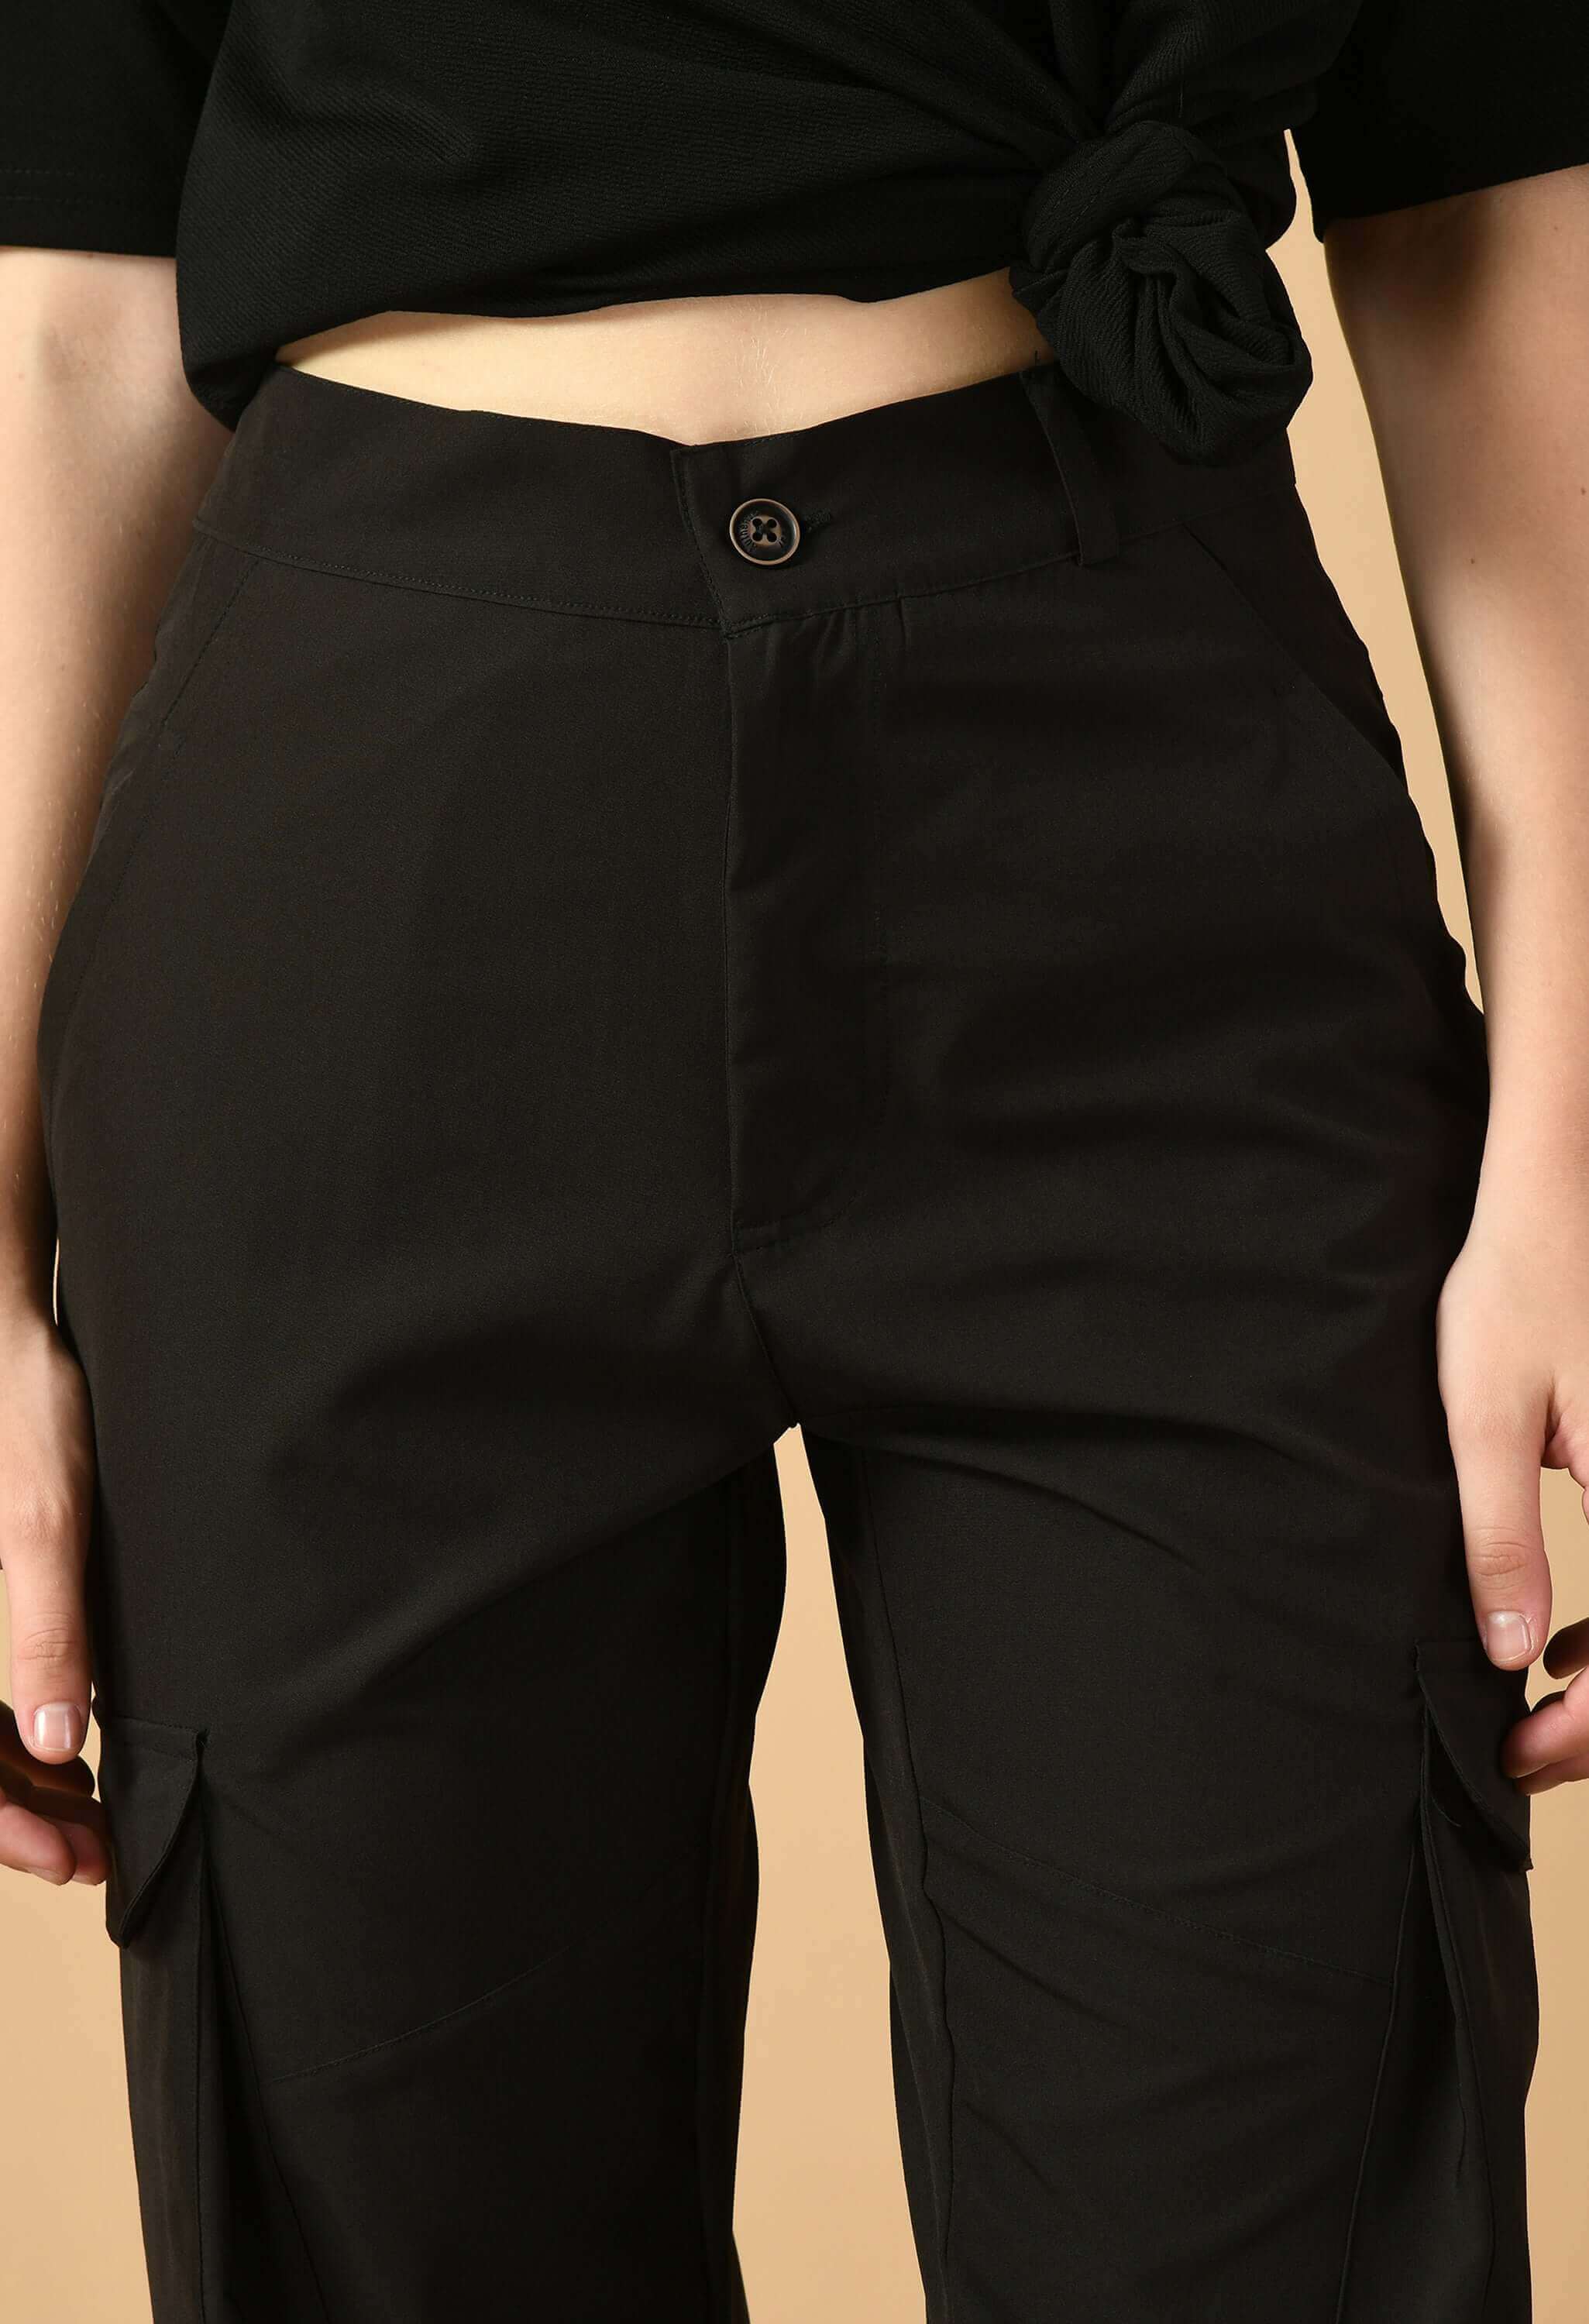 Black color NS cargo five pocket by offmint